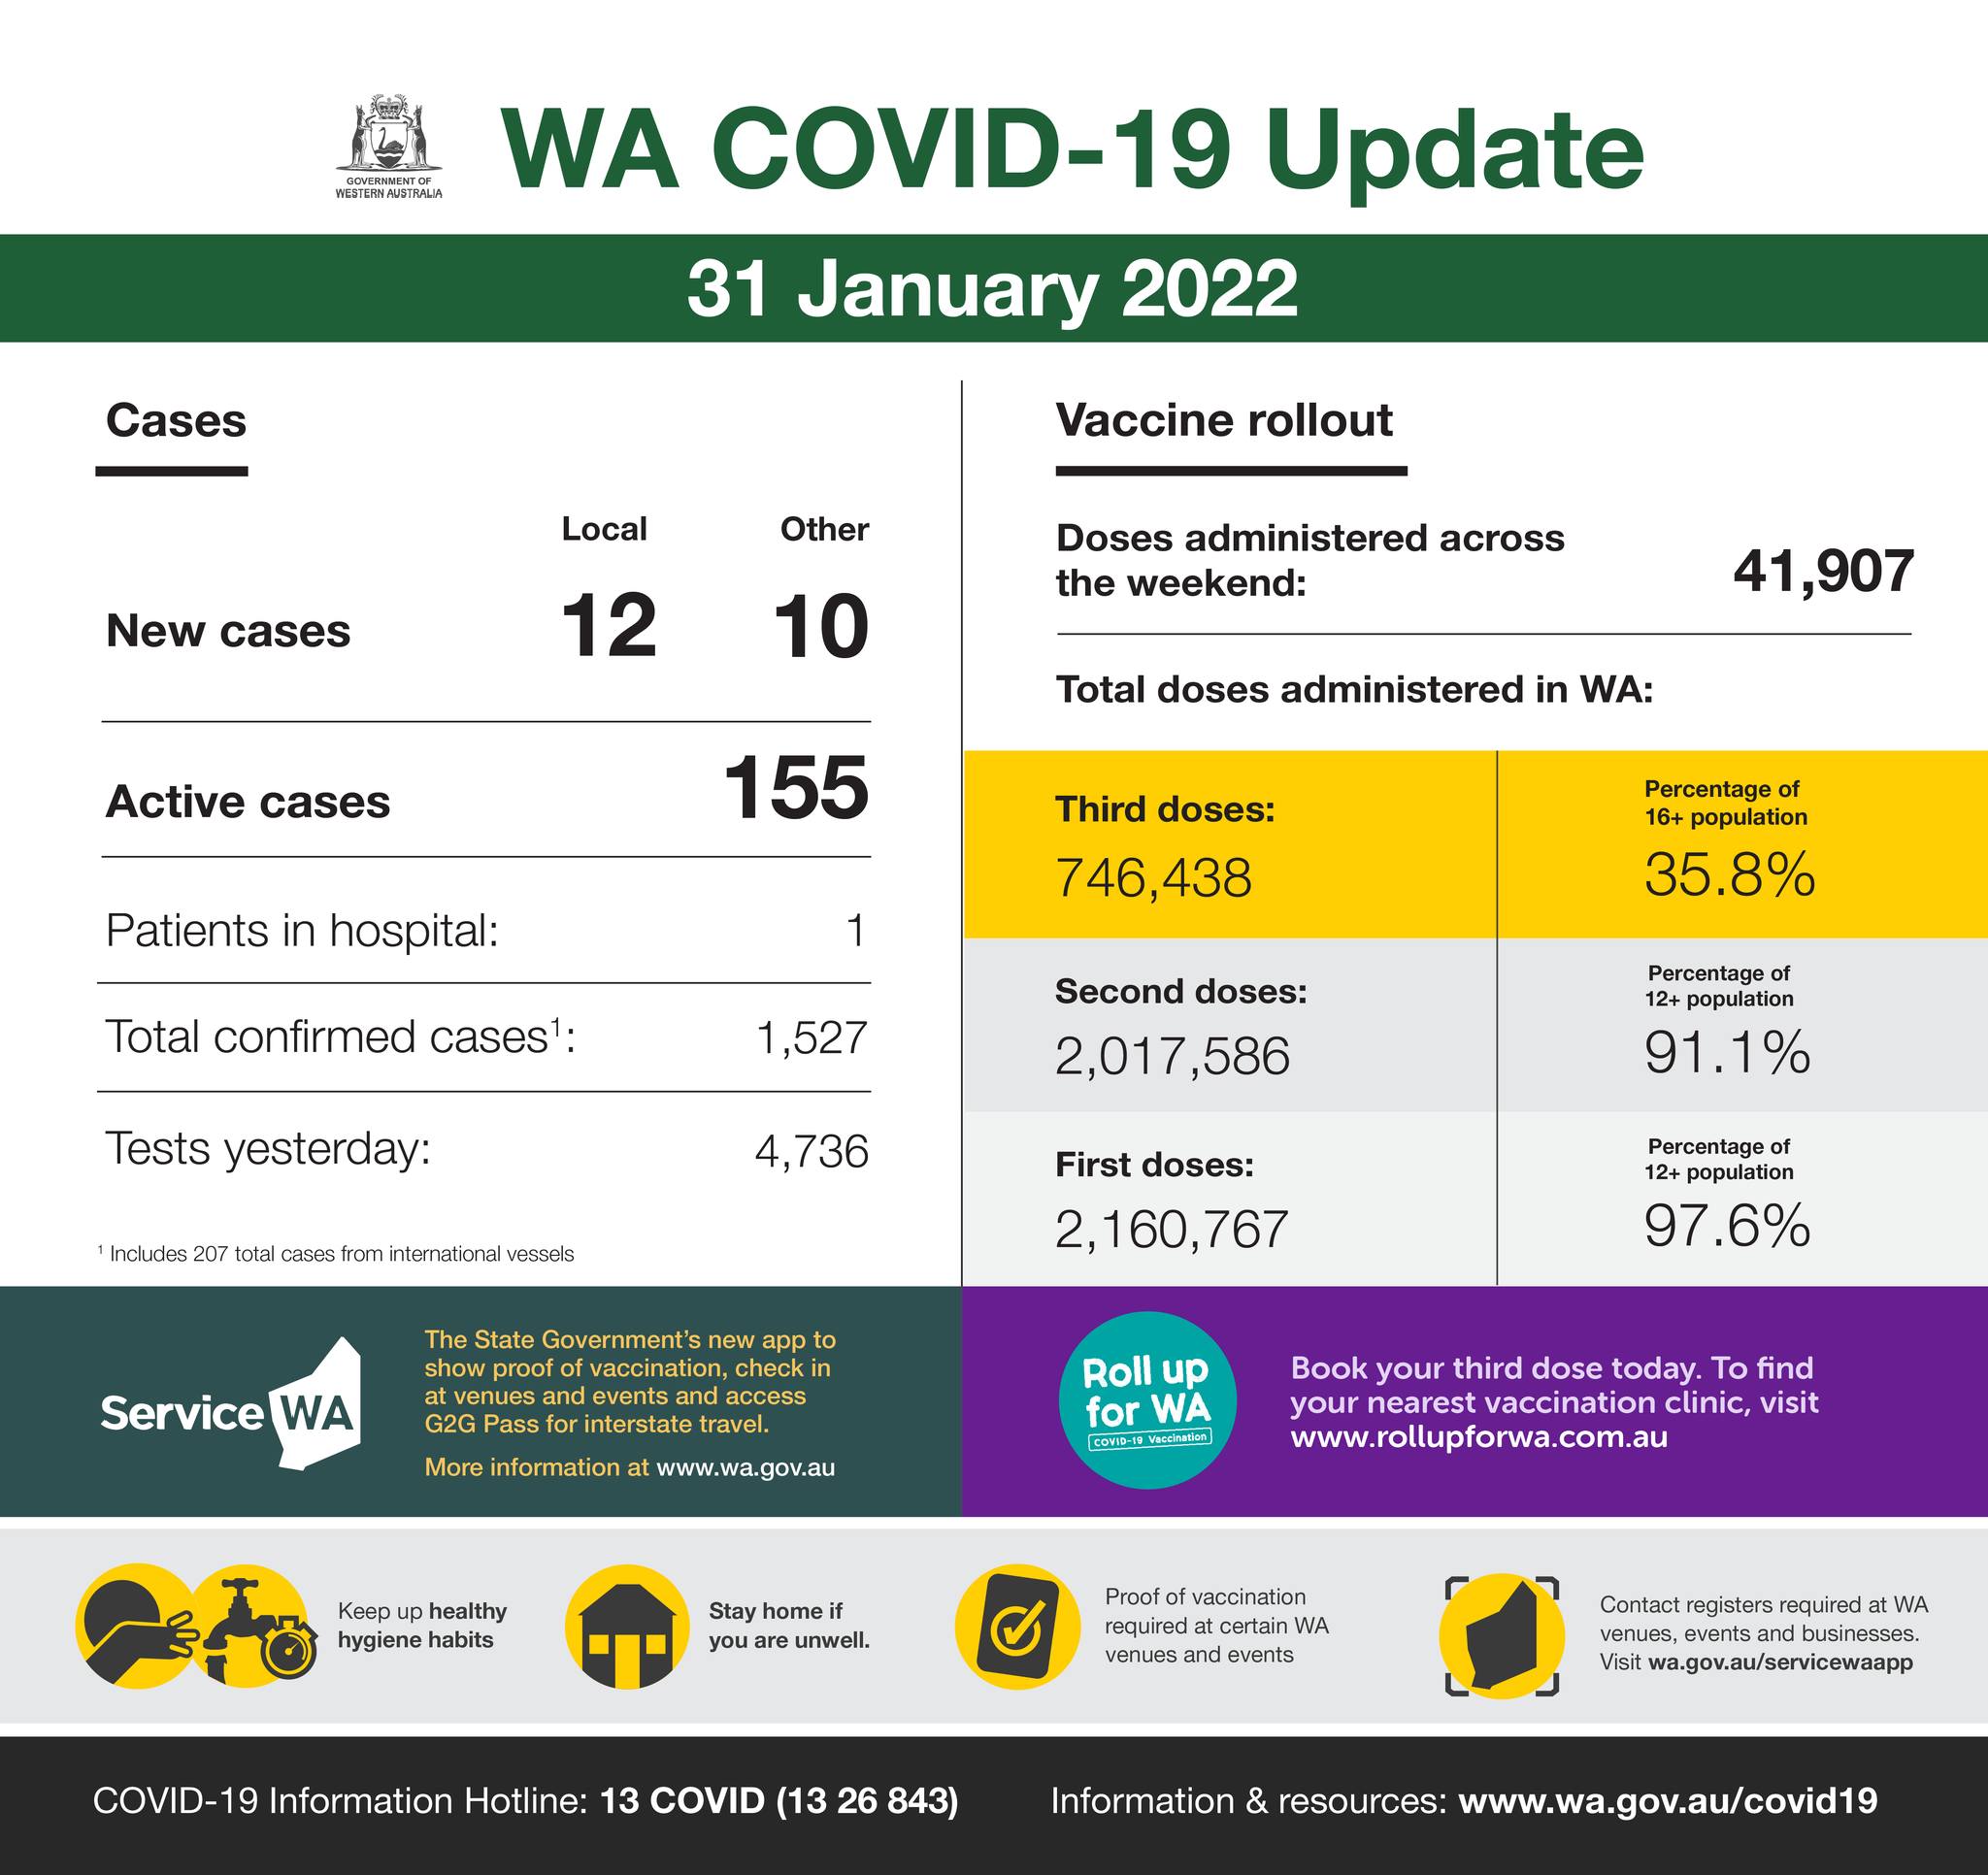 May be an image of text that says 'WESTERNAUSTRALIA Cases WA COVID-19 Update 31 January 2022 Local Vaccine rollout New cases 12 Doses administered across weekend: 10 Active cases Total doses administered in WA: 41,907 155 Patients in hospital: Third doses: 746,438 Total confirmed cases1: Percentage 1,527 Tests yesterday: 35.8% Second doses: 2,017,586 *Includes207 totalcases 4,736 vessels Percentage population 91.1% First doses: 2,160,767 Service WA Percentage 97.6% Rollu for WA Keepu healthy hygiene habits Book your third dose today. find nearestvaccinatio clinic, visit www.rollupforwa.com.a Stay home you unwell events COVID- 19 Information Hotine: 13 COVID (13 26 843) required atWA Contact venues, wa.gov.au/servicewaapp Information & resources: www.wa.gov.au/covid19'